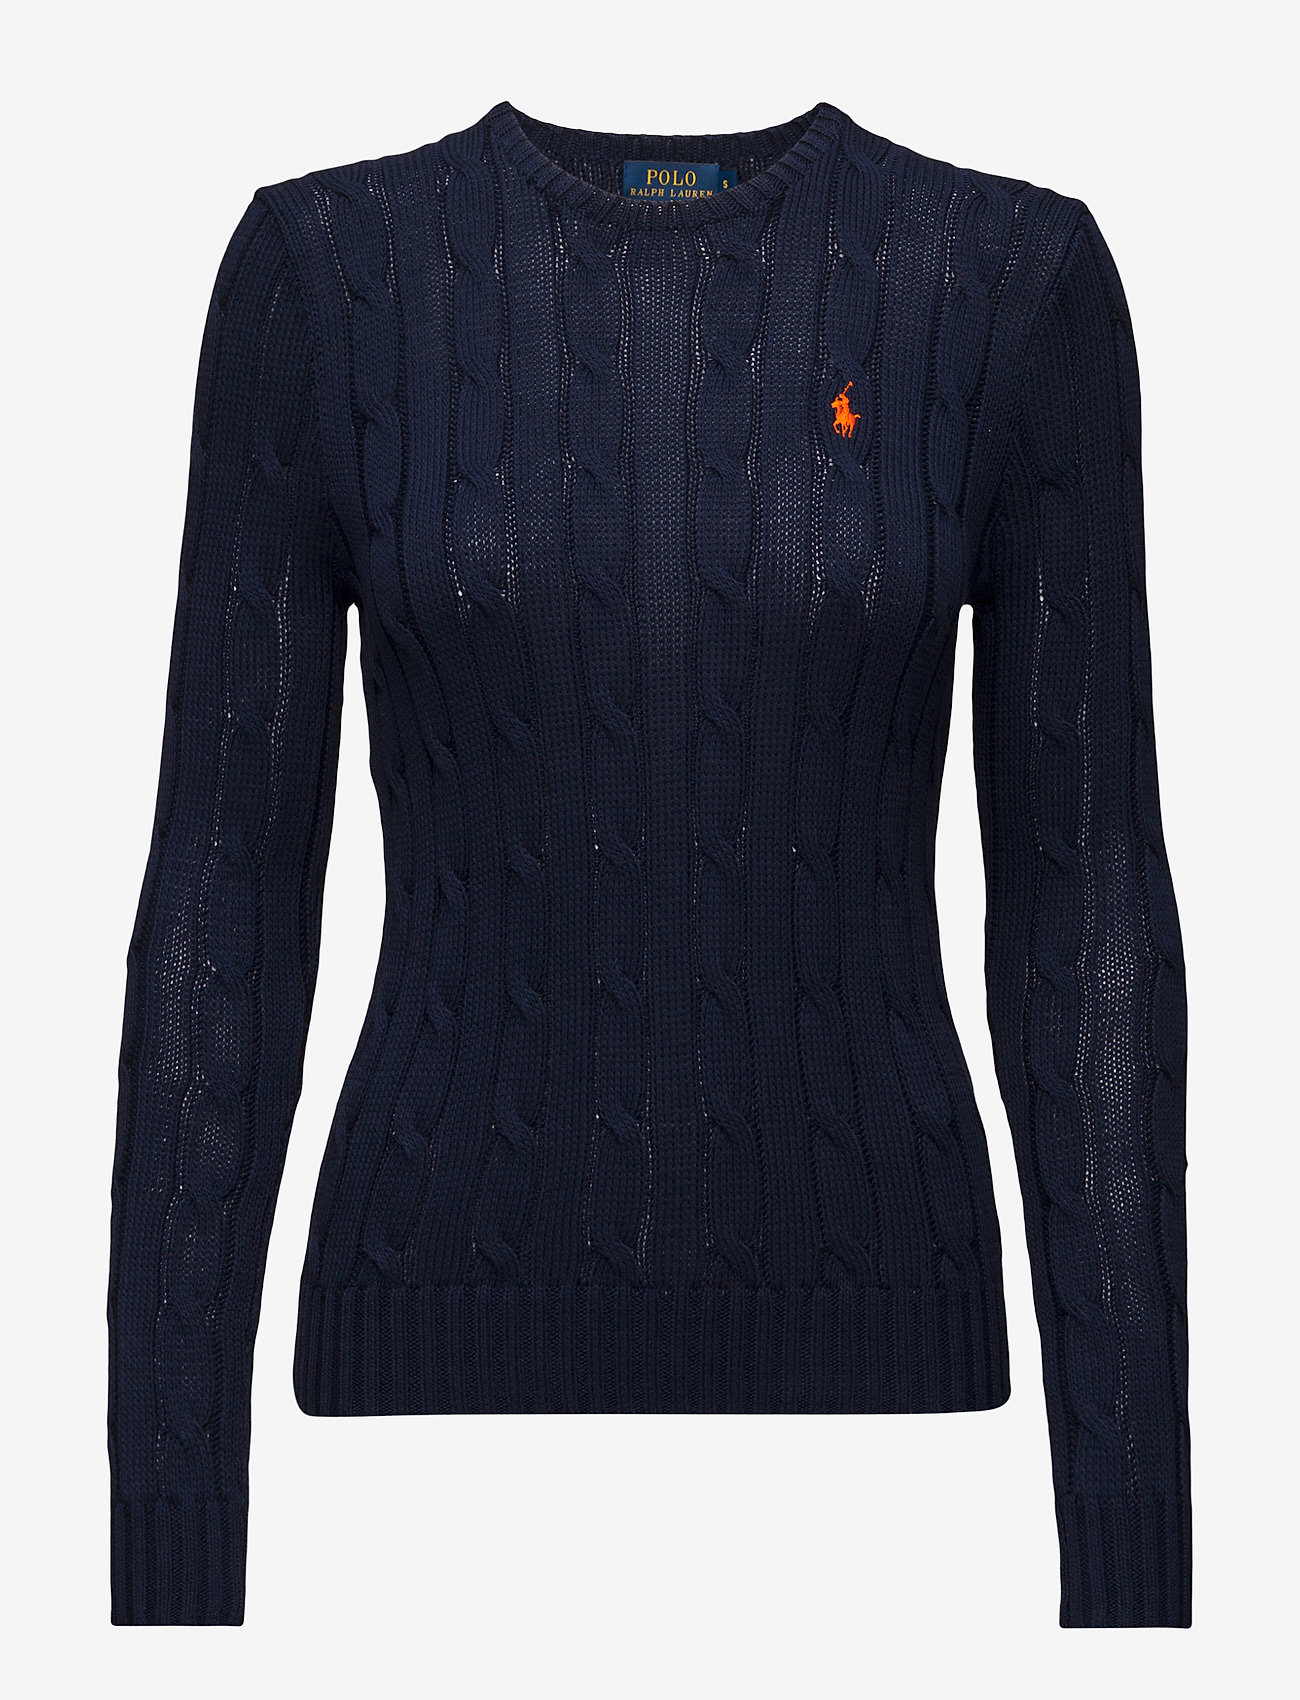 Polo Ralph Lauren - Cable-Knit Cotton Sweater - jumpers - hunter navy - 1